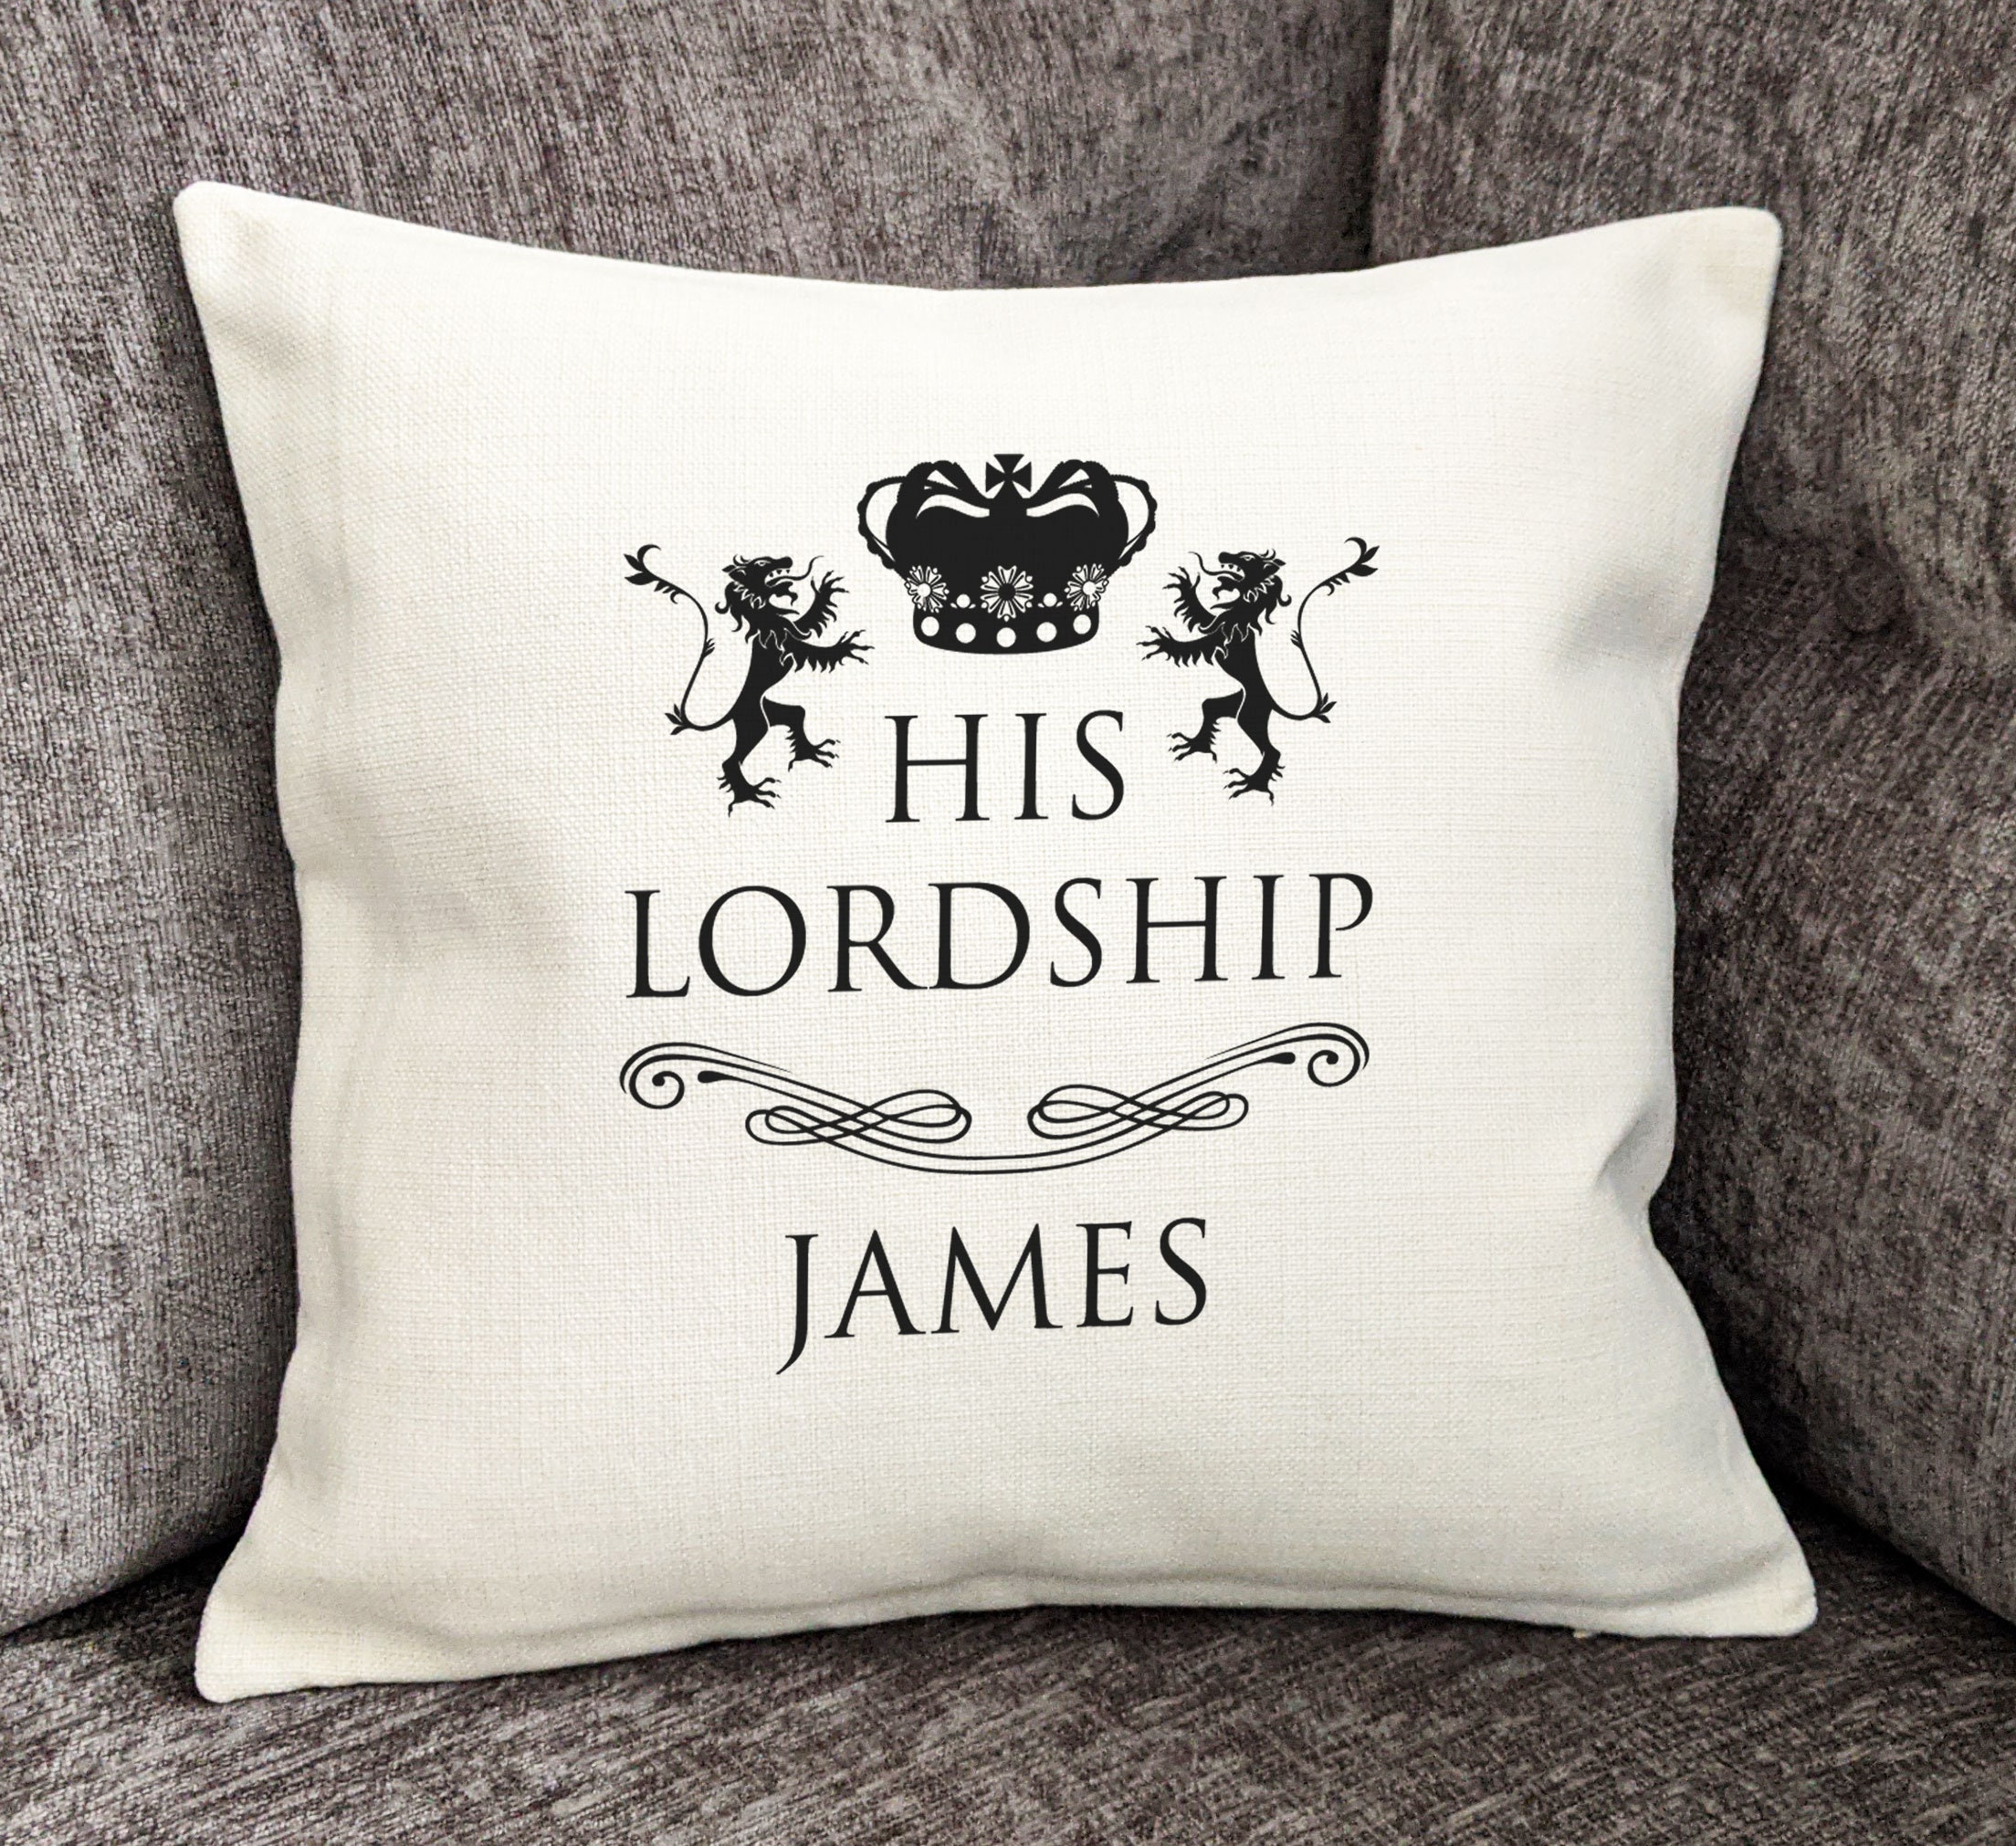 COUPLE HER LADYSHIP HIS LORDSHIP COOL IDEAL GIFT PRESENT CUSHION COVER 16X16" 